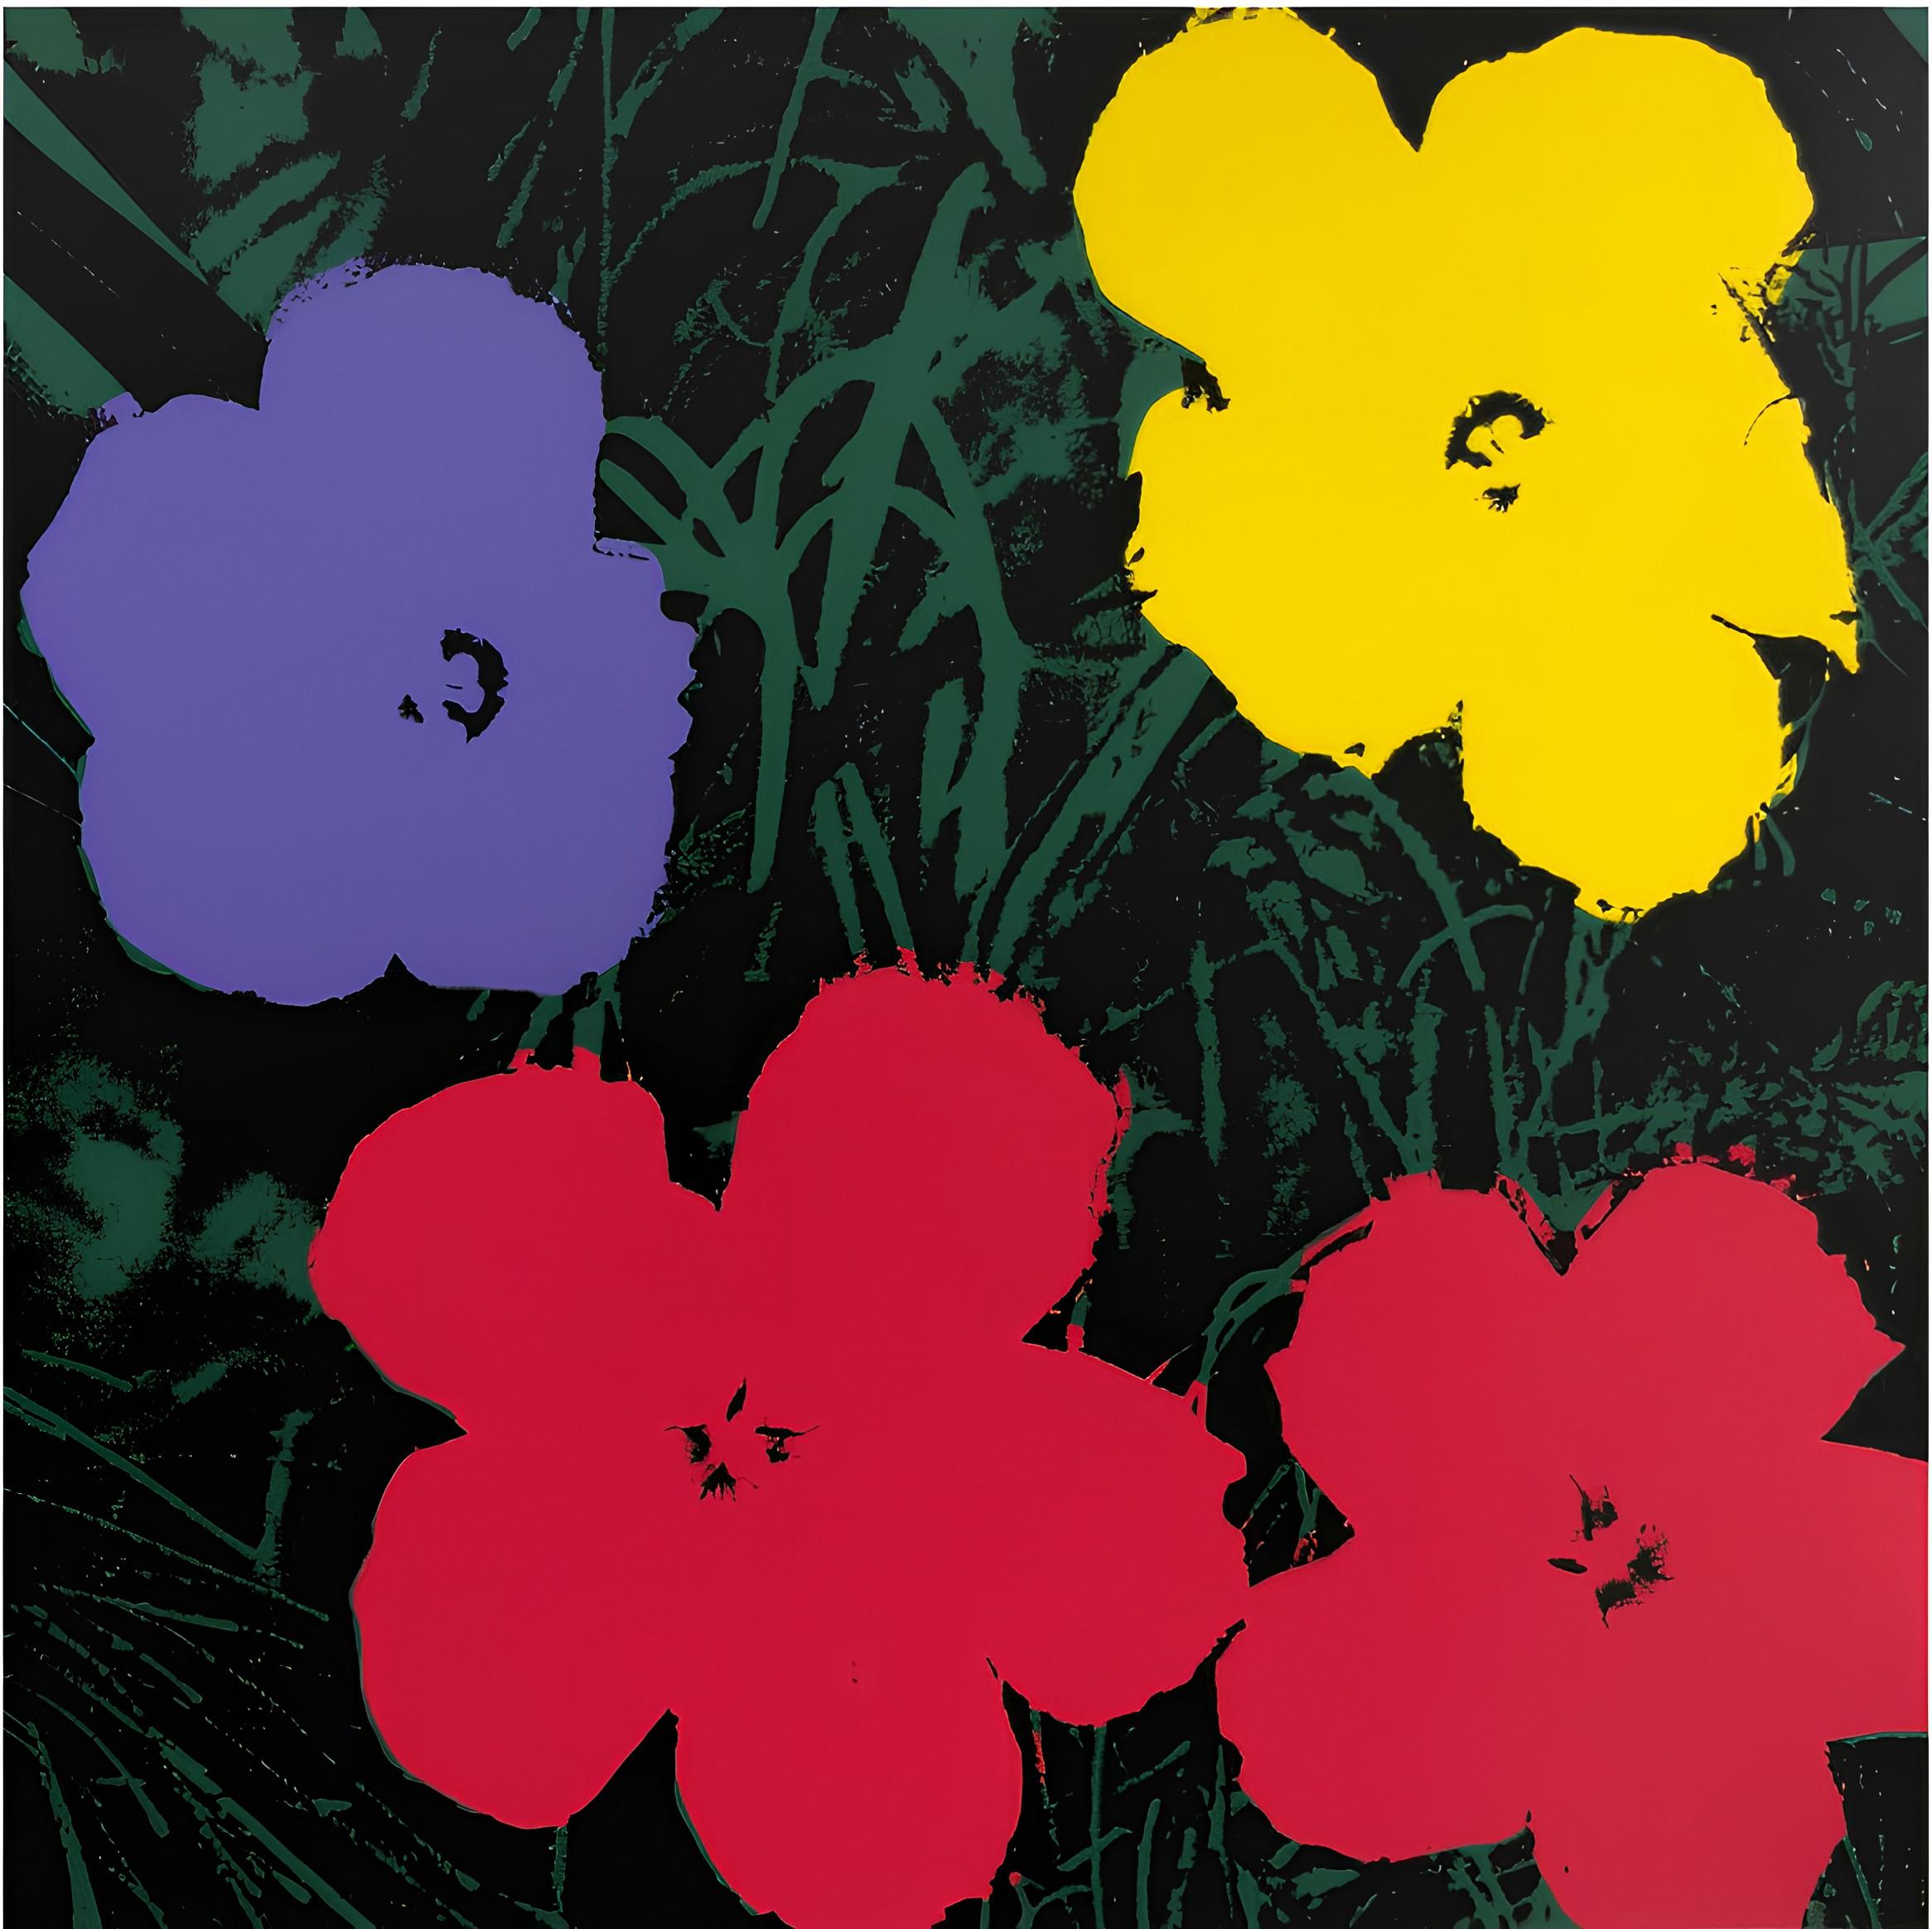 Who owns Andy Warhol paintings?